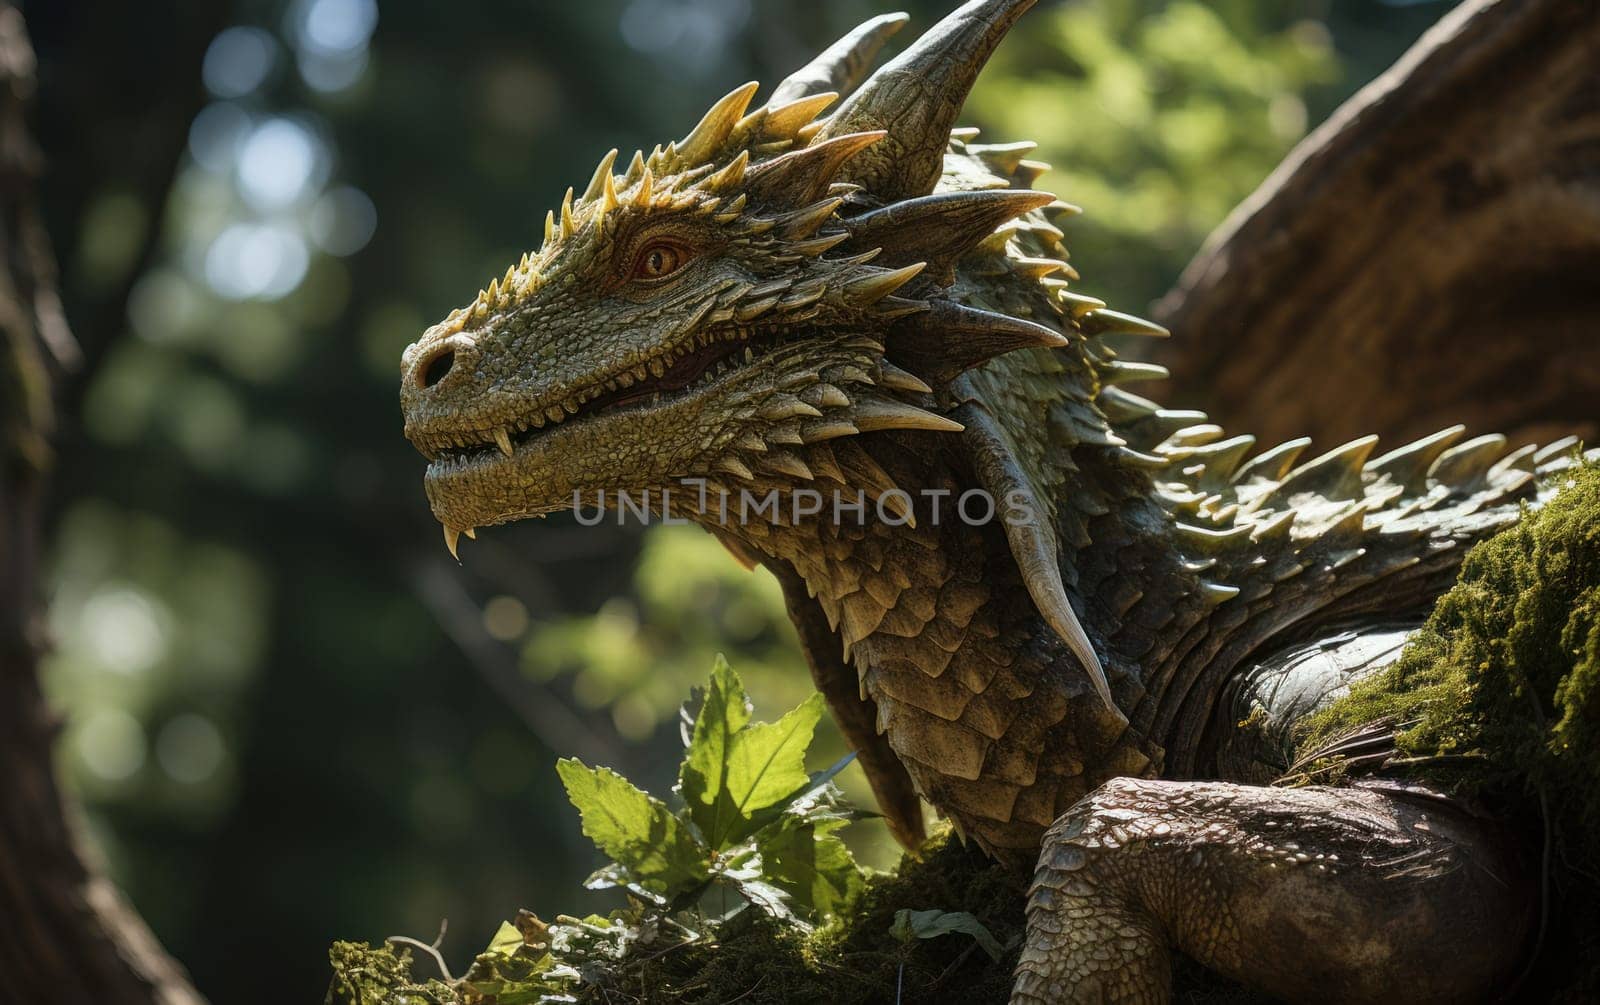 Green dragon in the forest, symbol of the year 2024, AI by but_photo